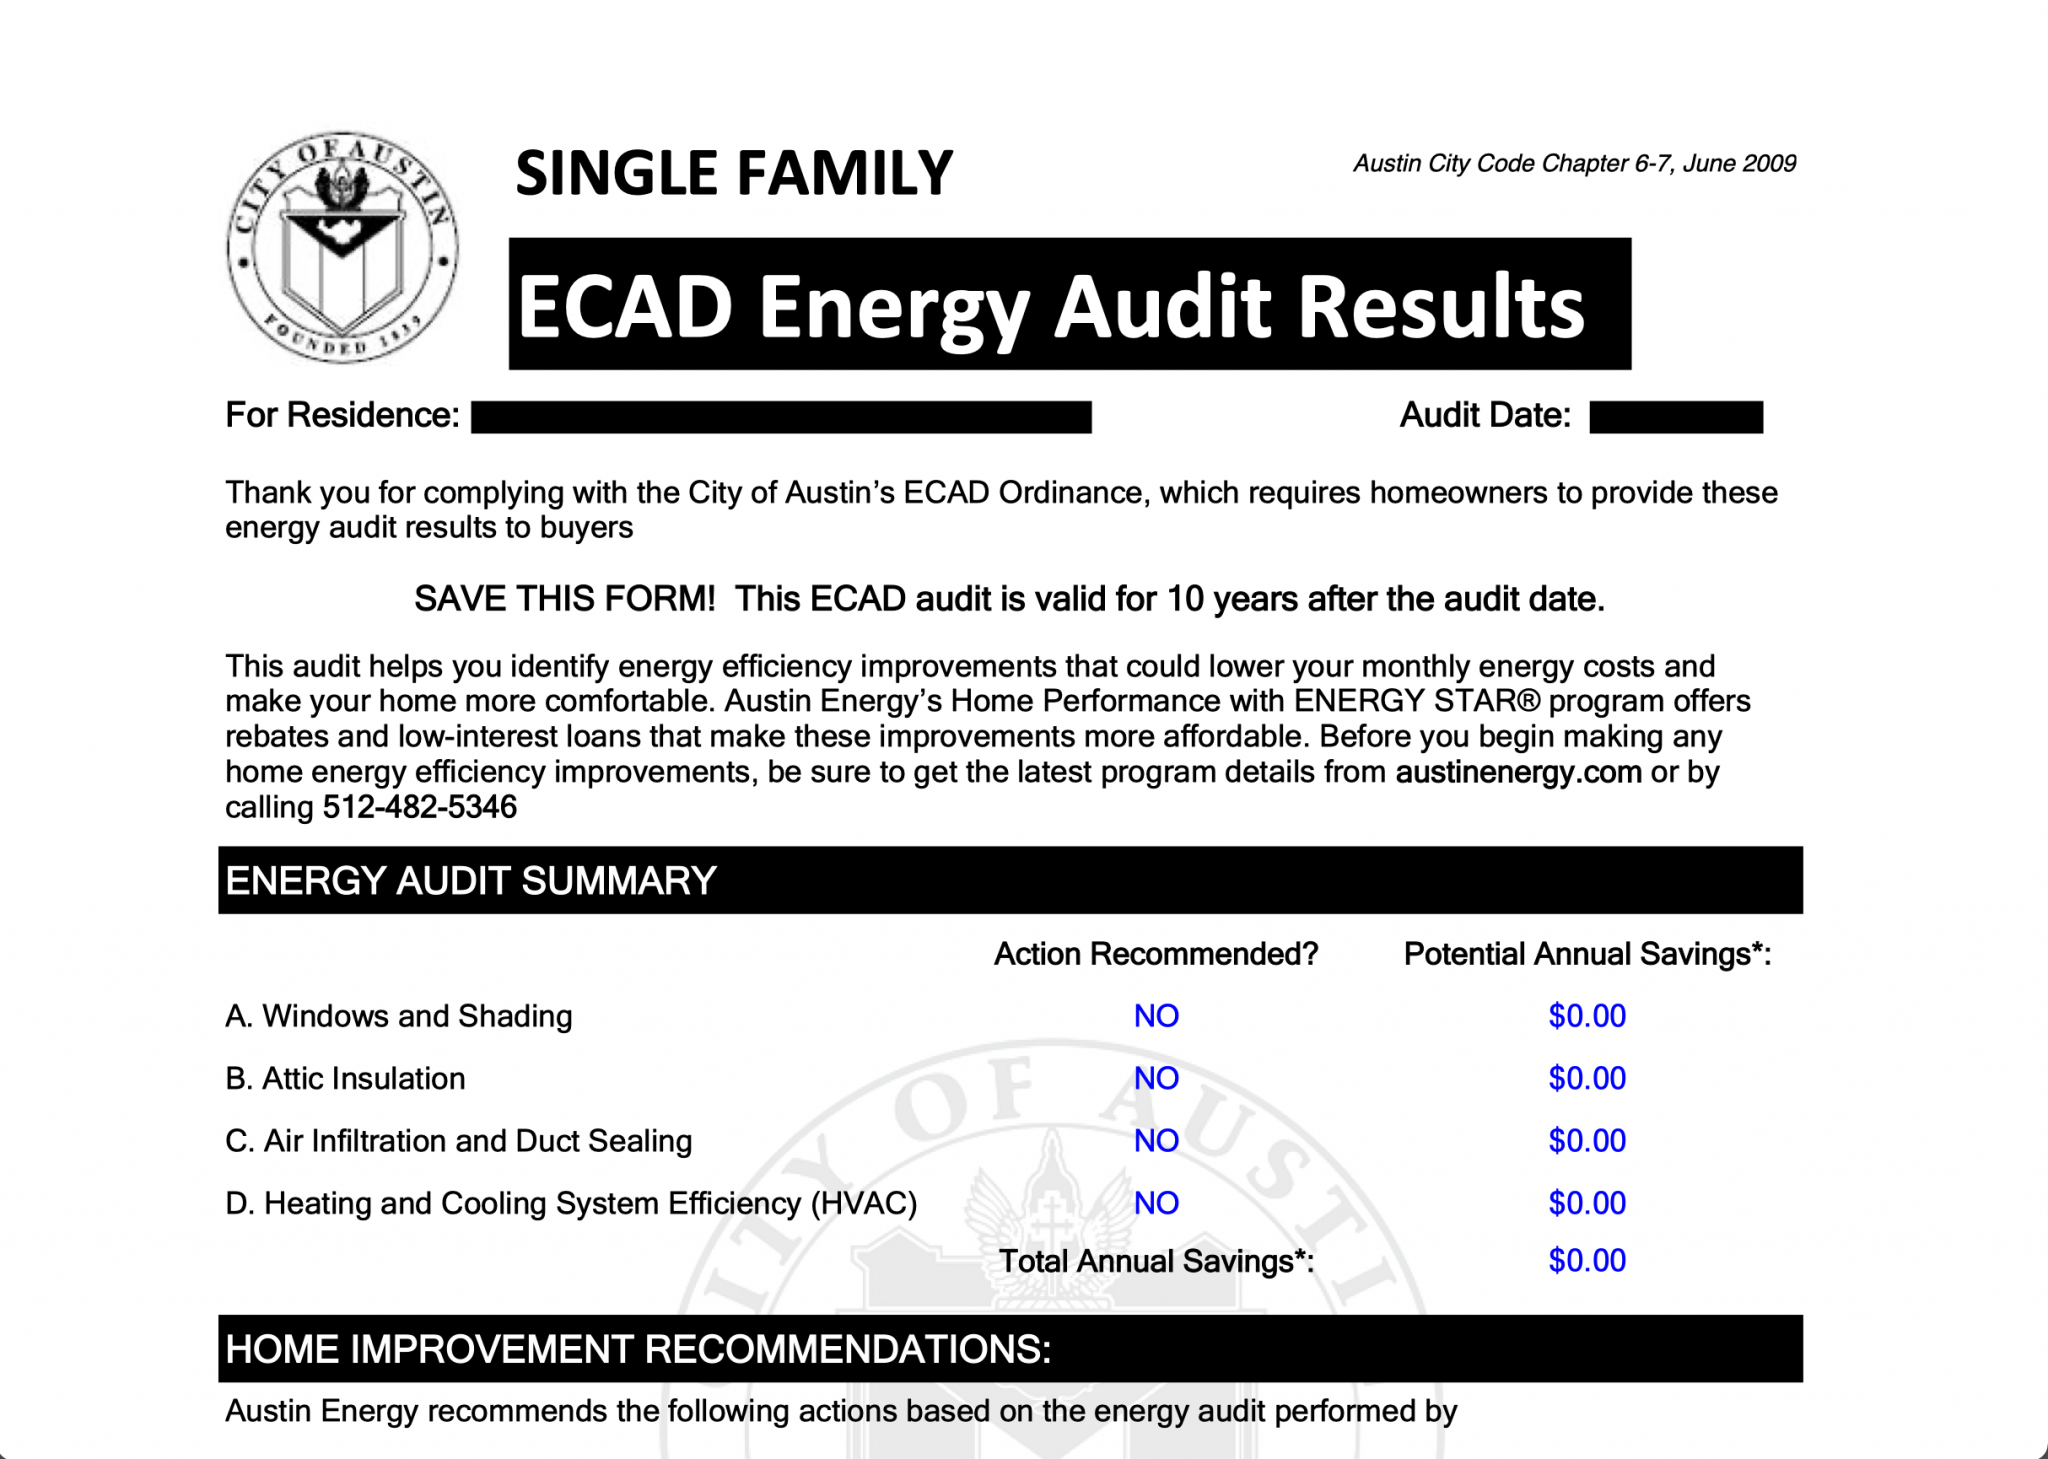 ECAD energy audit results